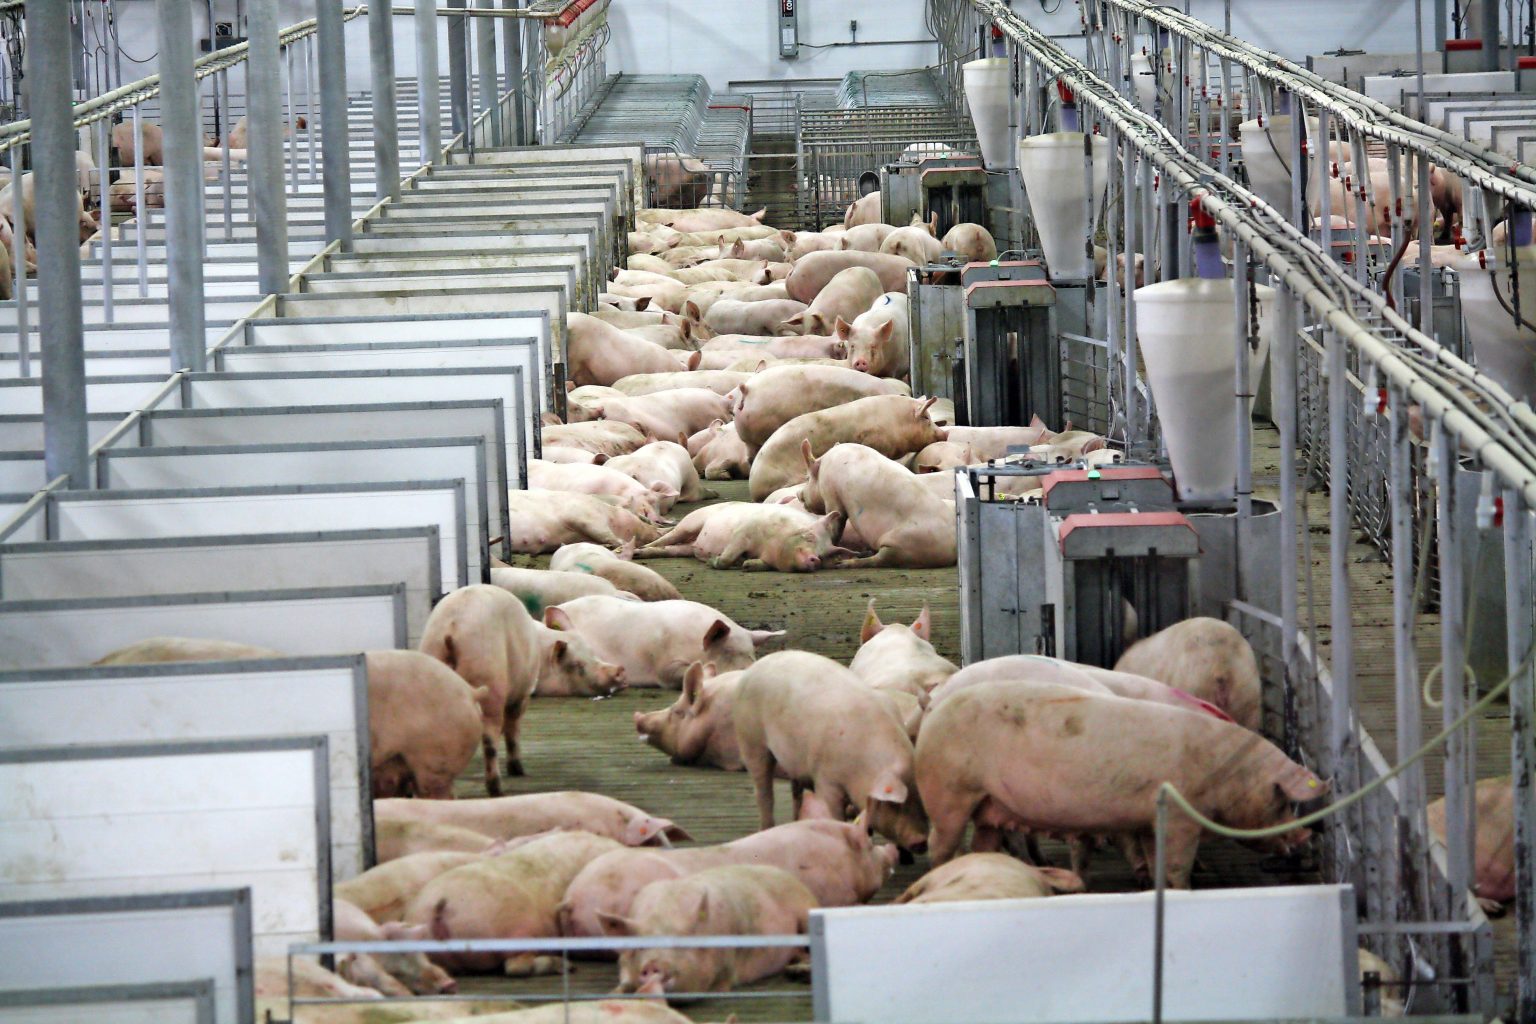 Decreasing sow stall use in stages - Pig Progress